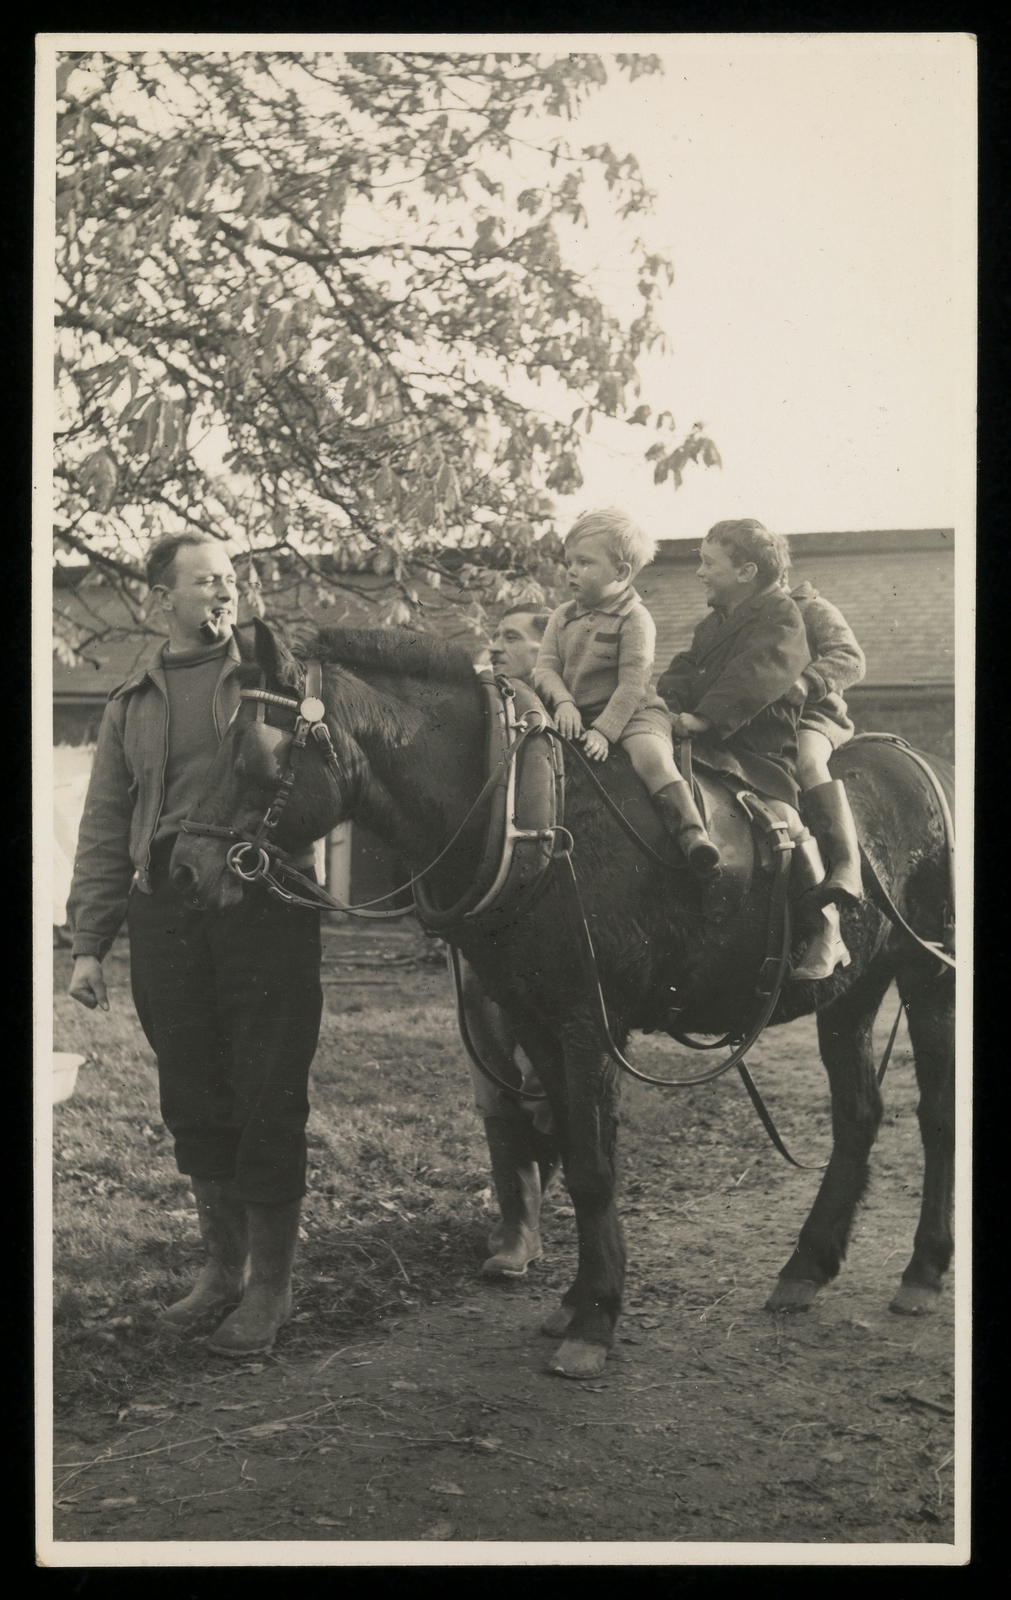 Black and white photograph showing a man leading three toddlers who are sitting on the back of a horse.